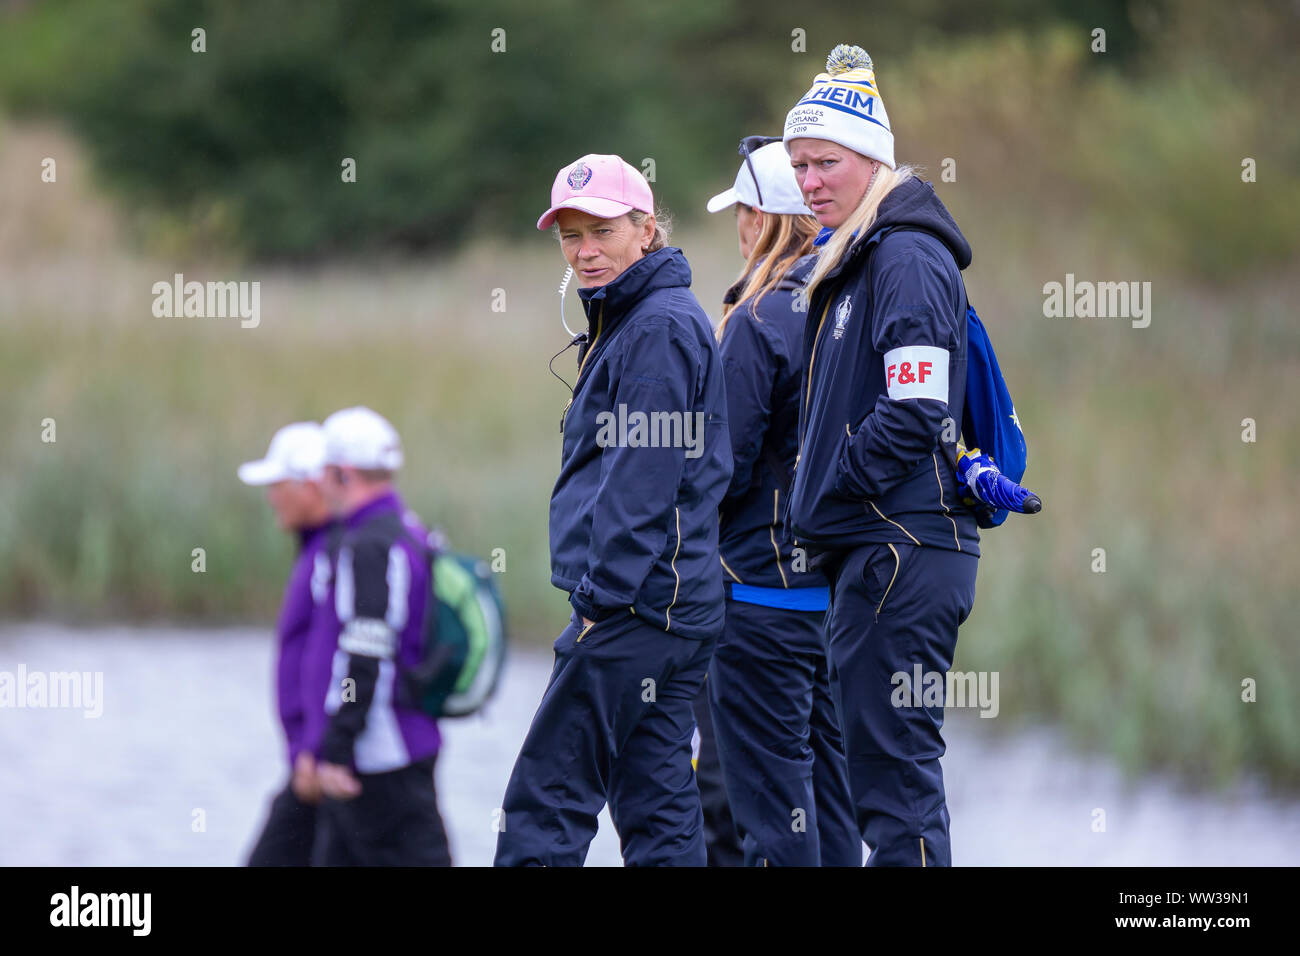 Gleneagles, Scotland 12th September 2019. A final day of practice and press conferences ahead of the Solheim Cup 2019 on the PGA Centenary course. Stock Photo